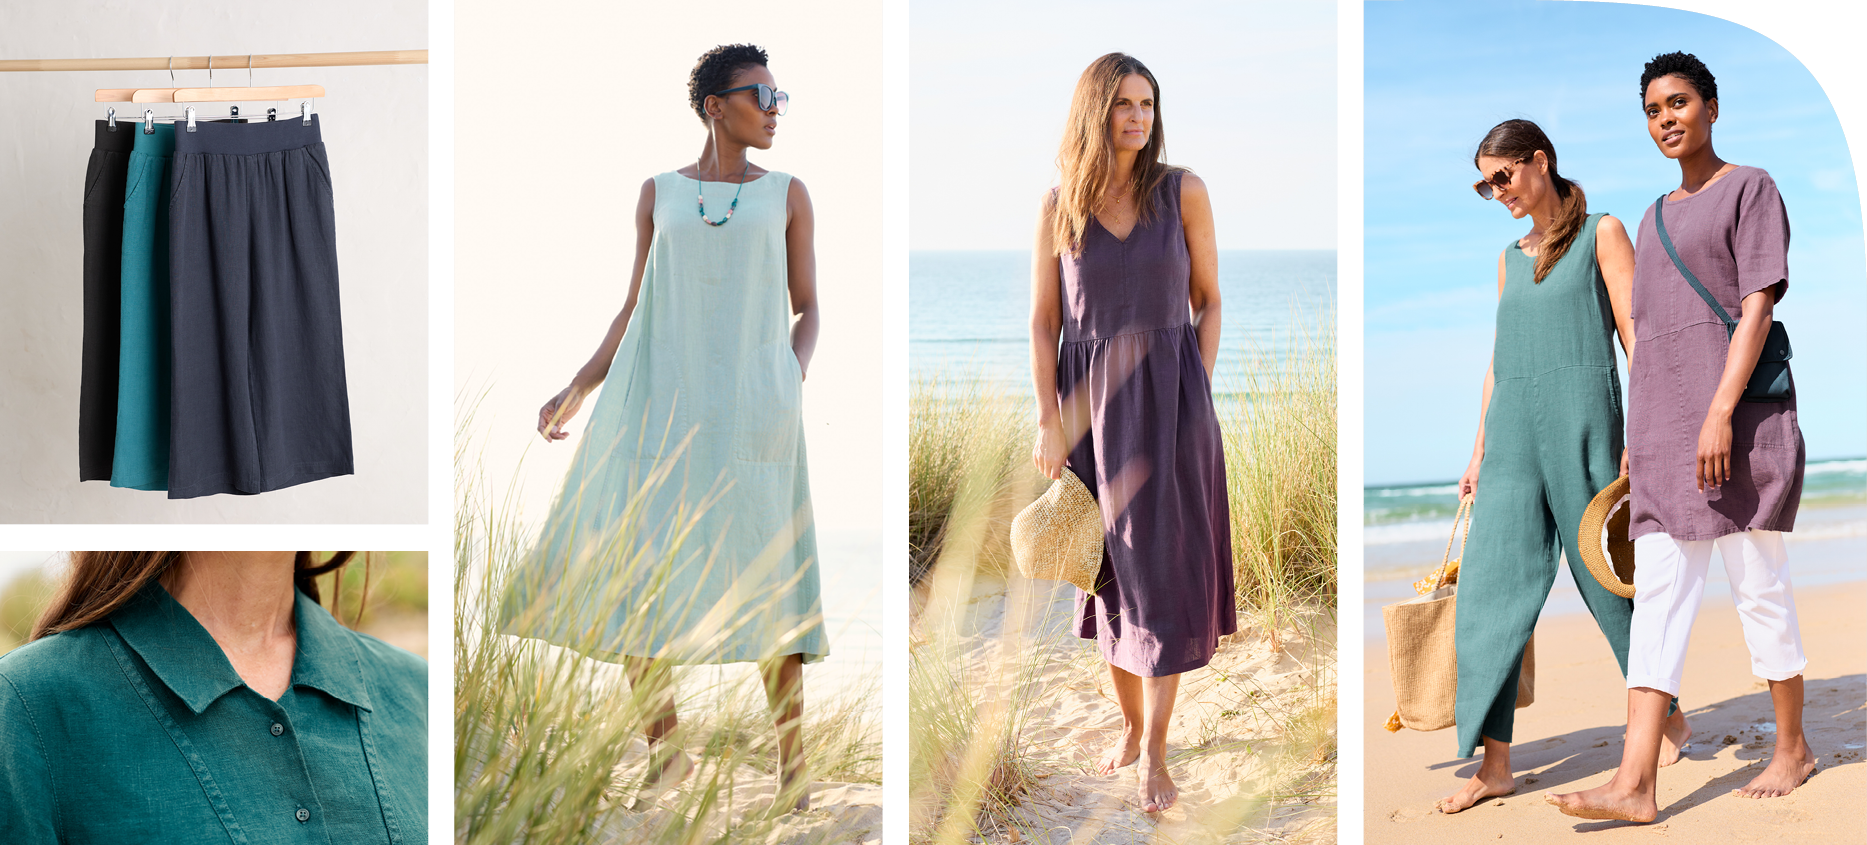 Models wear Seasalt Cornwall's new linen collection on a beach